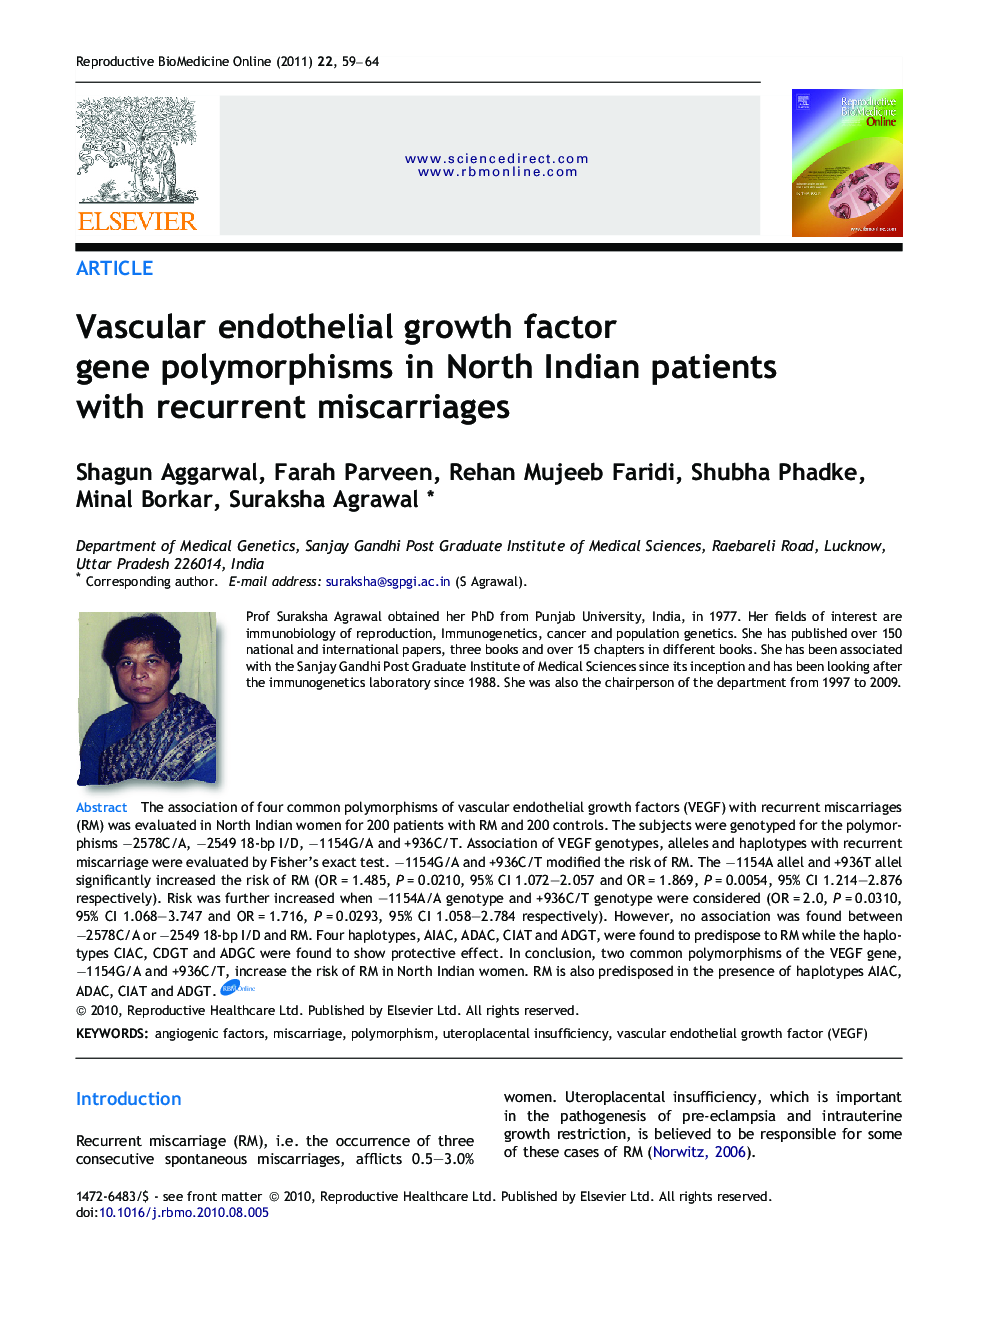 Vascular endothelial growth factor gene polymorphisms in North Indian patients with recurrent miscarriages 